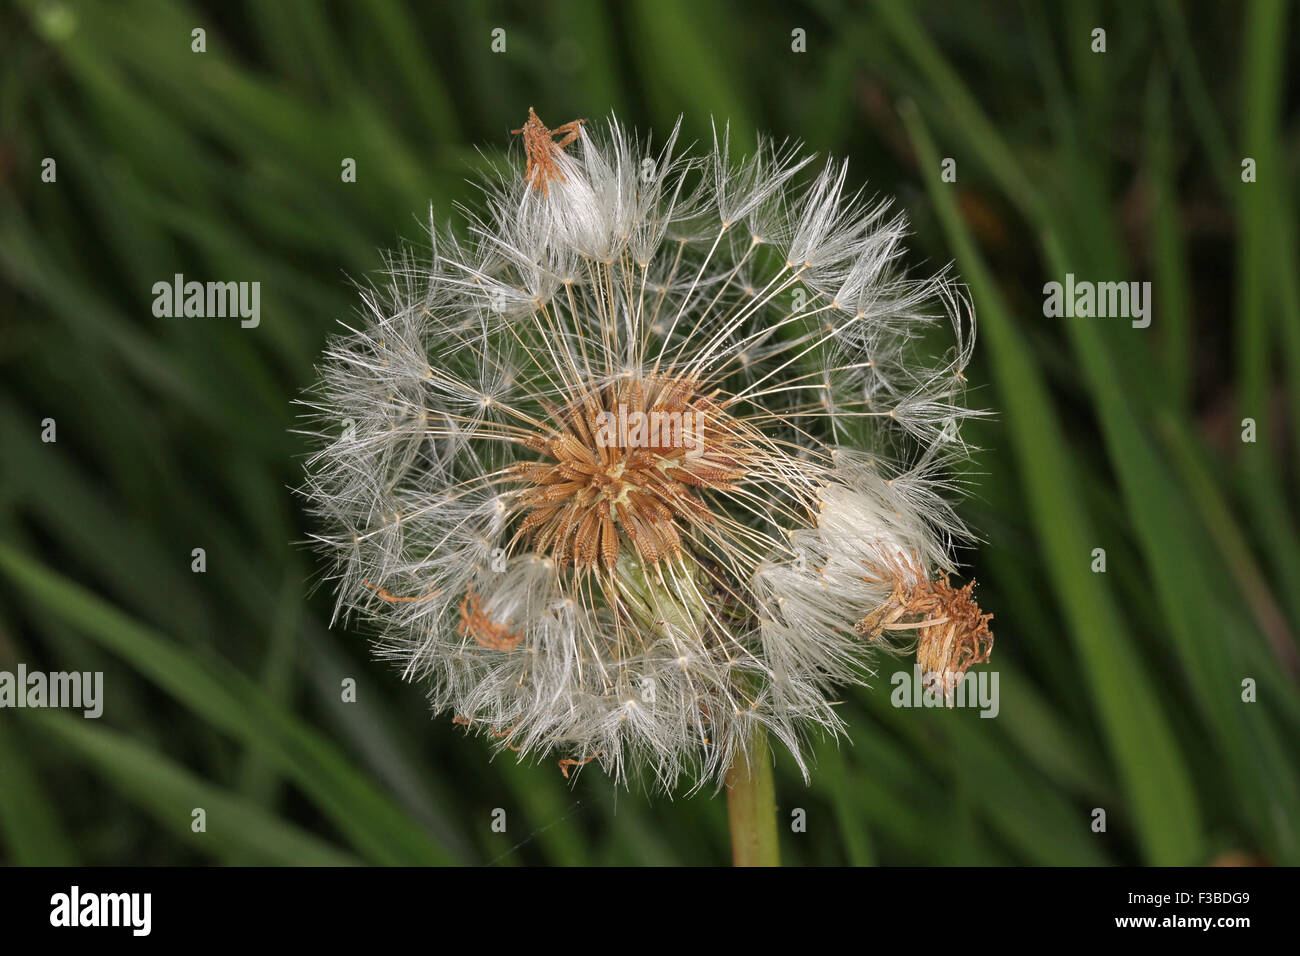 Close up photo of a Dandelion flower gone to seed. Stock Photo